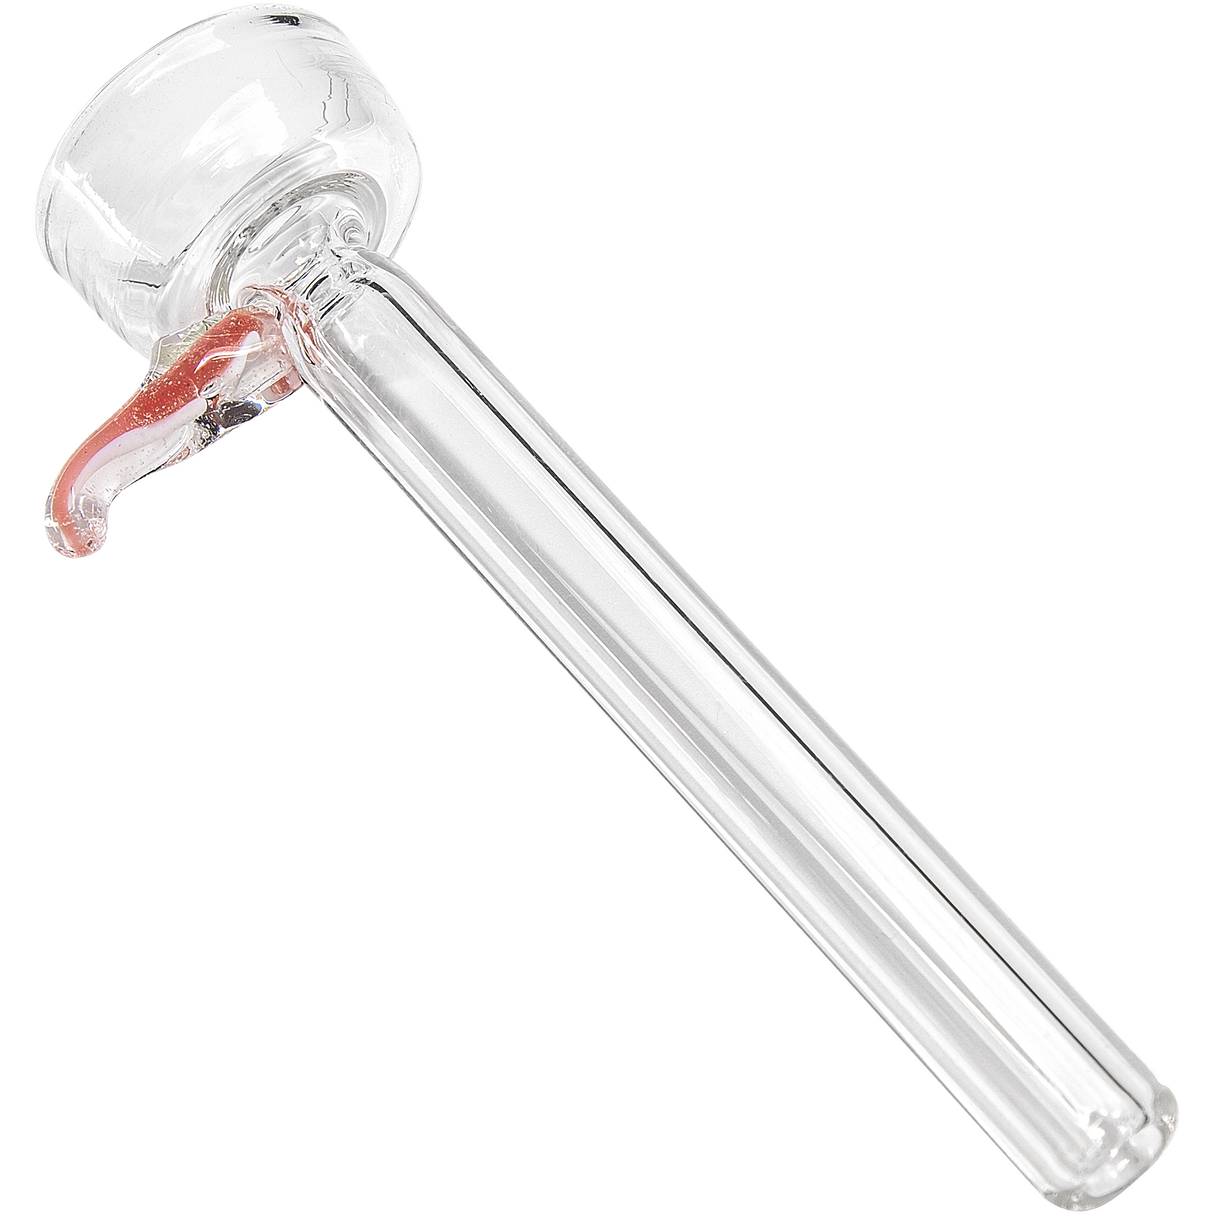 LA Pipes 9mm Clear Funnel Slide Bowl with Red Handle for Bongs, Side View